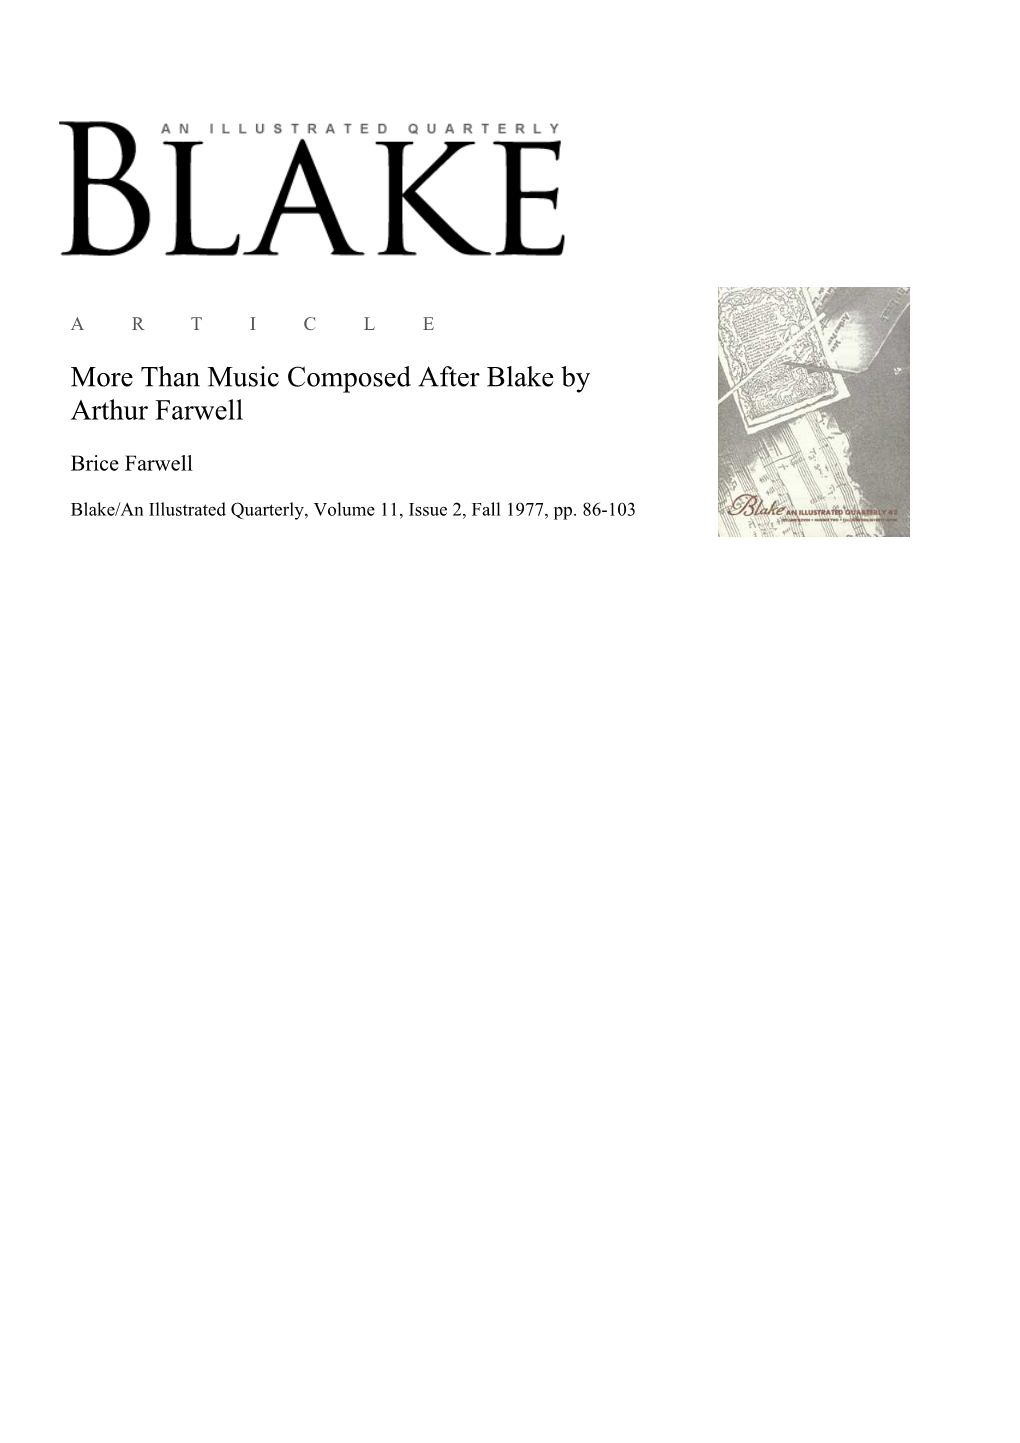 Than Music Composed After Blake by Arthur Farwell